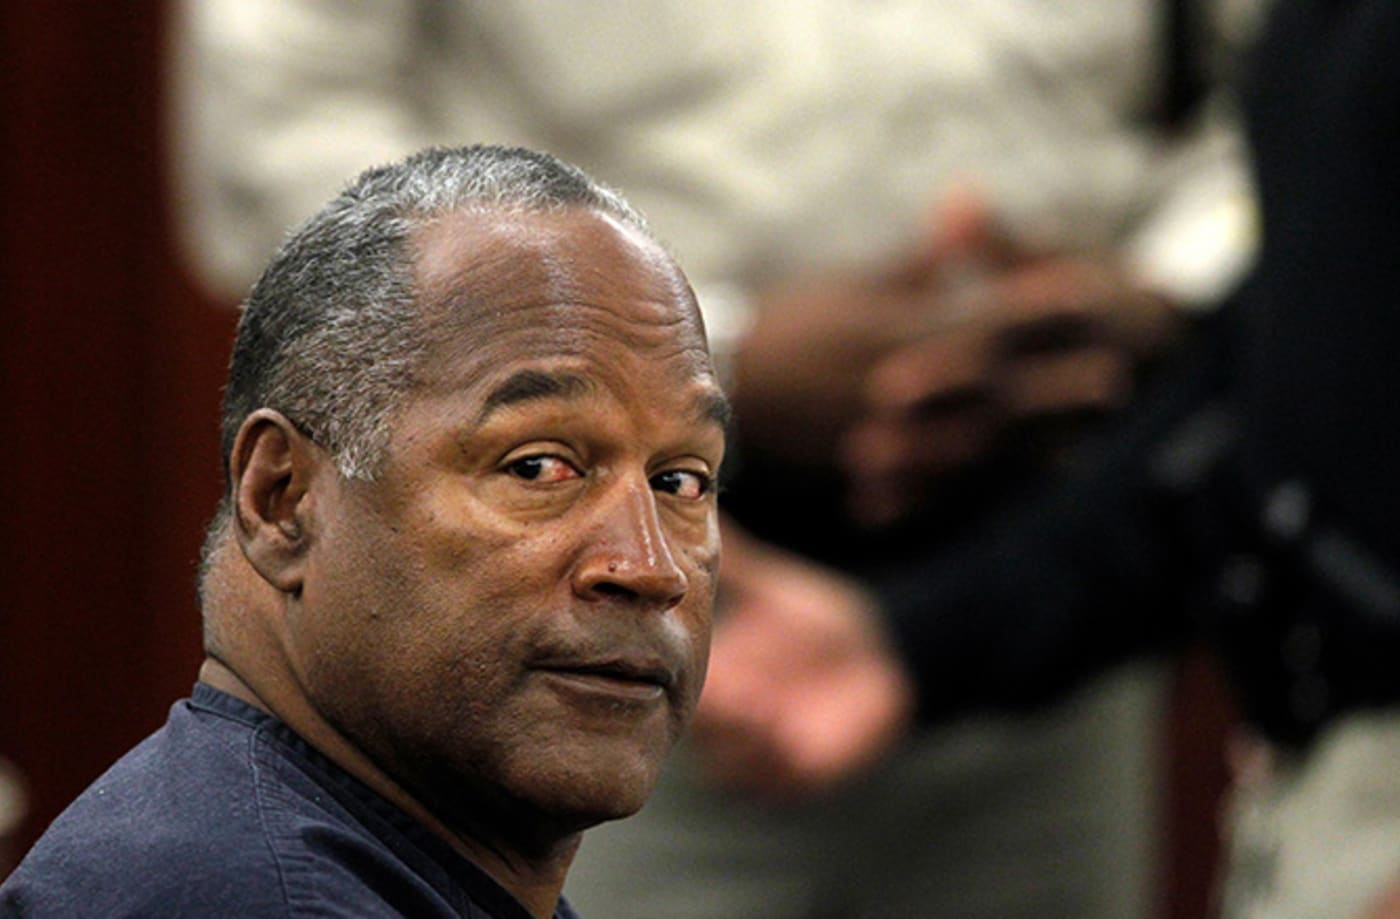 This is a photo of OJ.